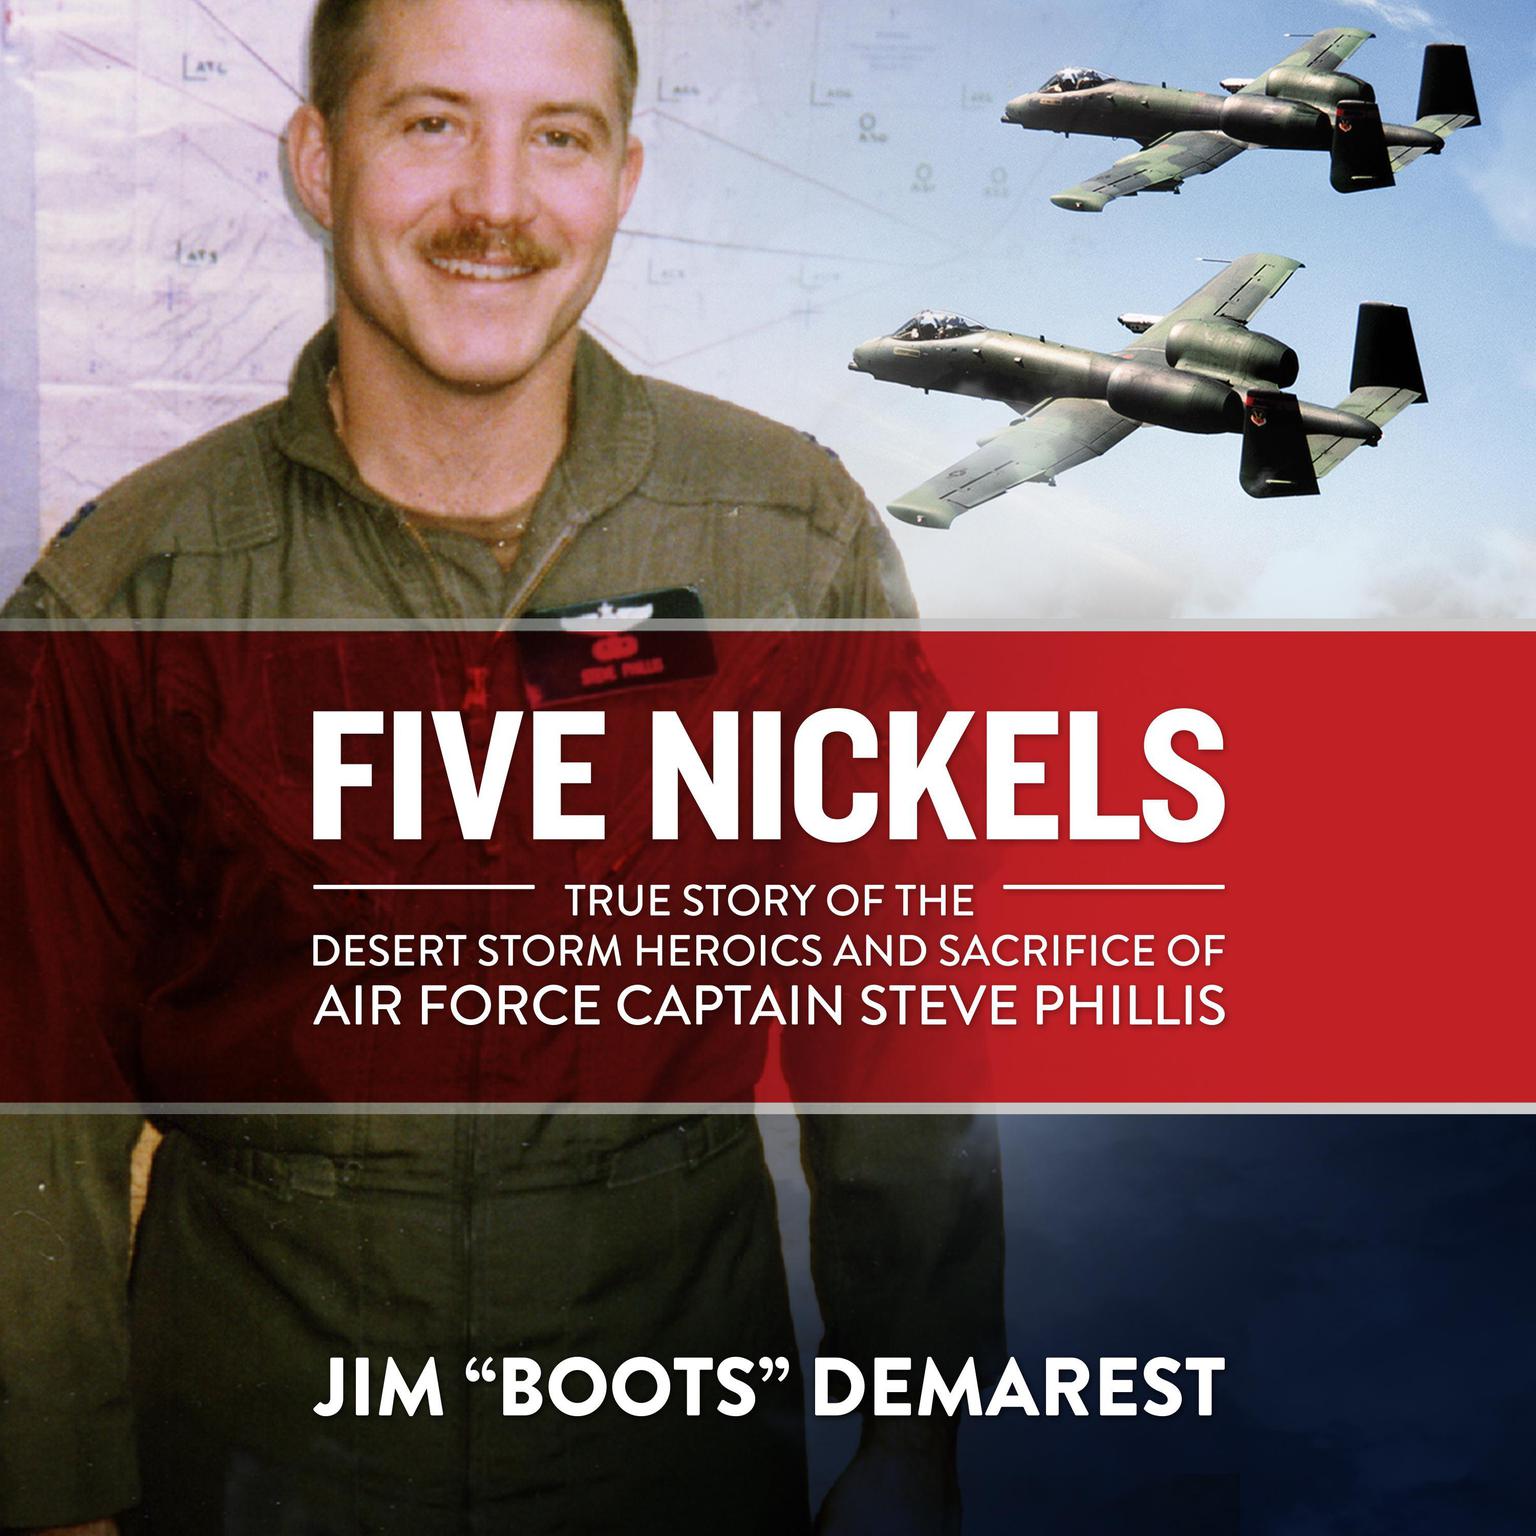 Five Nickels: True Story of the Desert Storm Heroics and Sacrifice of Air Force Captain Steve Phillis Audiobook, by Jim “Boots” Demarest